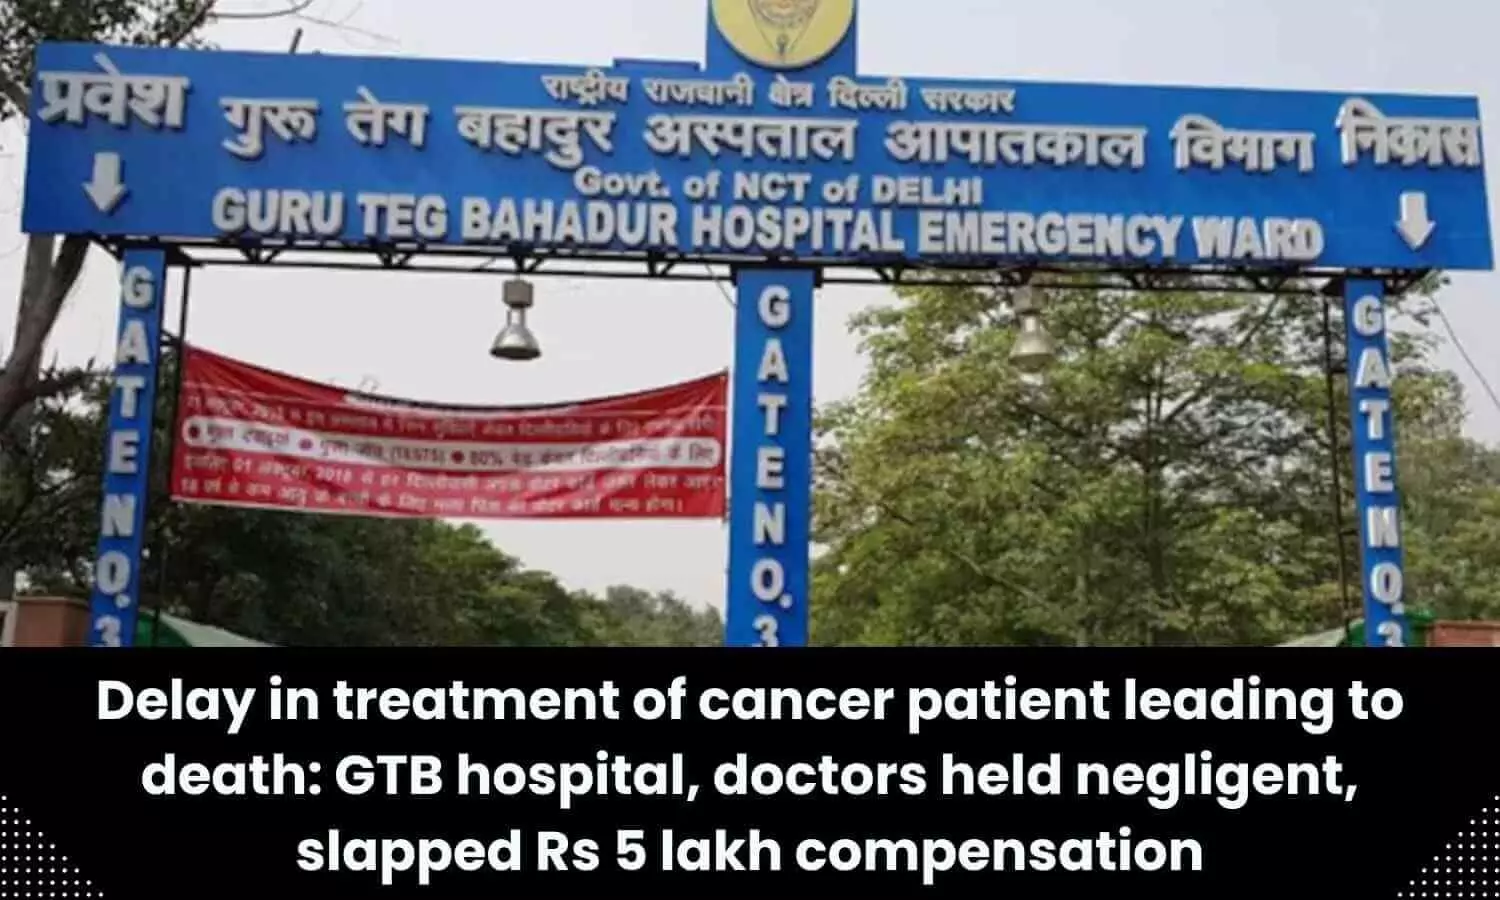 Delay in cancer patient treatment leading to death: GTB hospital, doctors held negligent